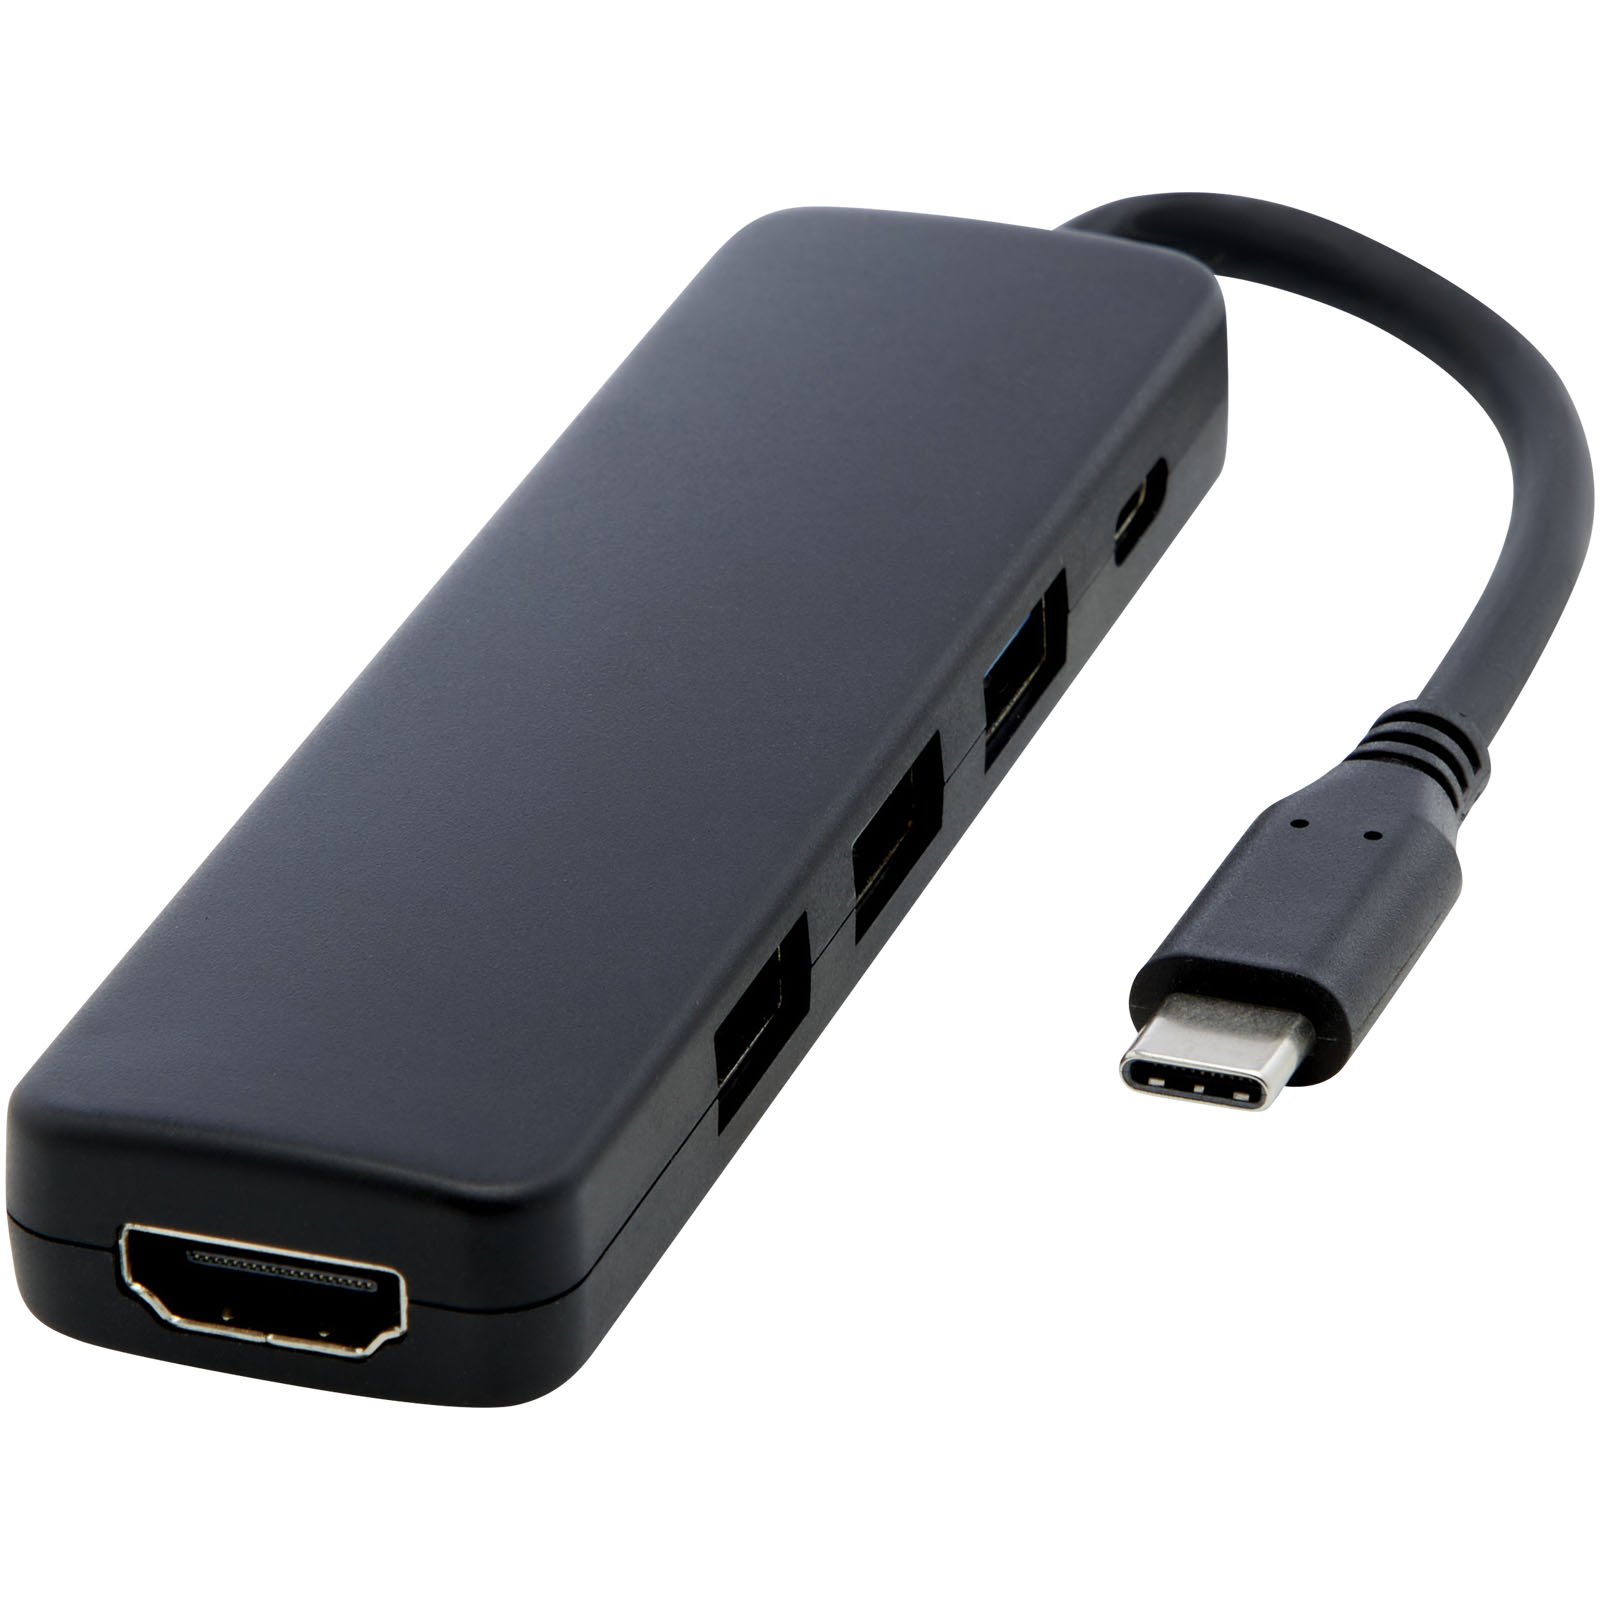 Loop RCS Multimedia Adapter made from Recycled Plastic with USB 2.0-3.0 and HDMI Port - Ivinghoe